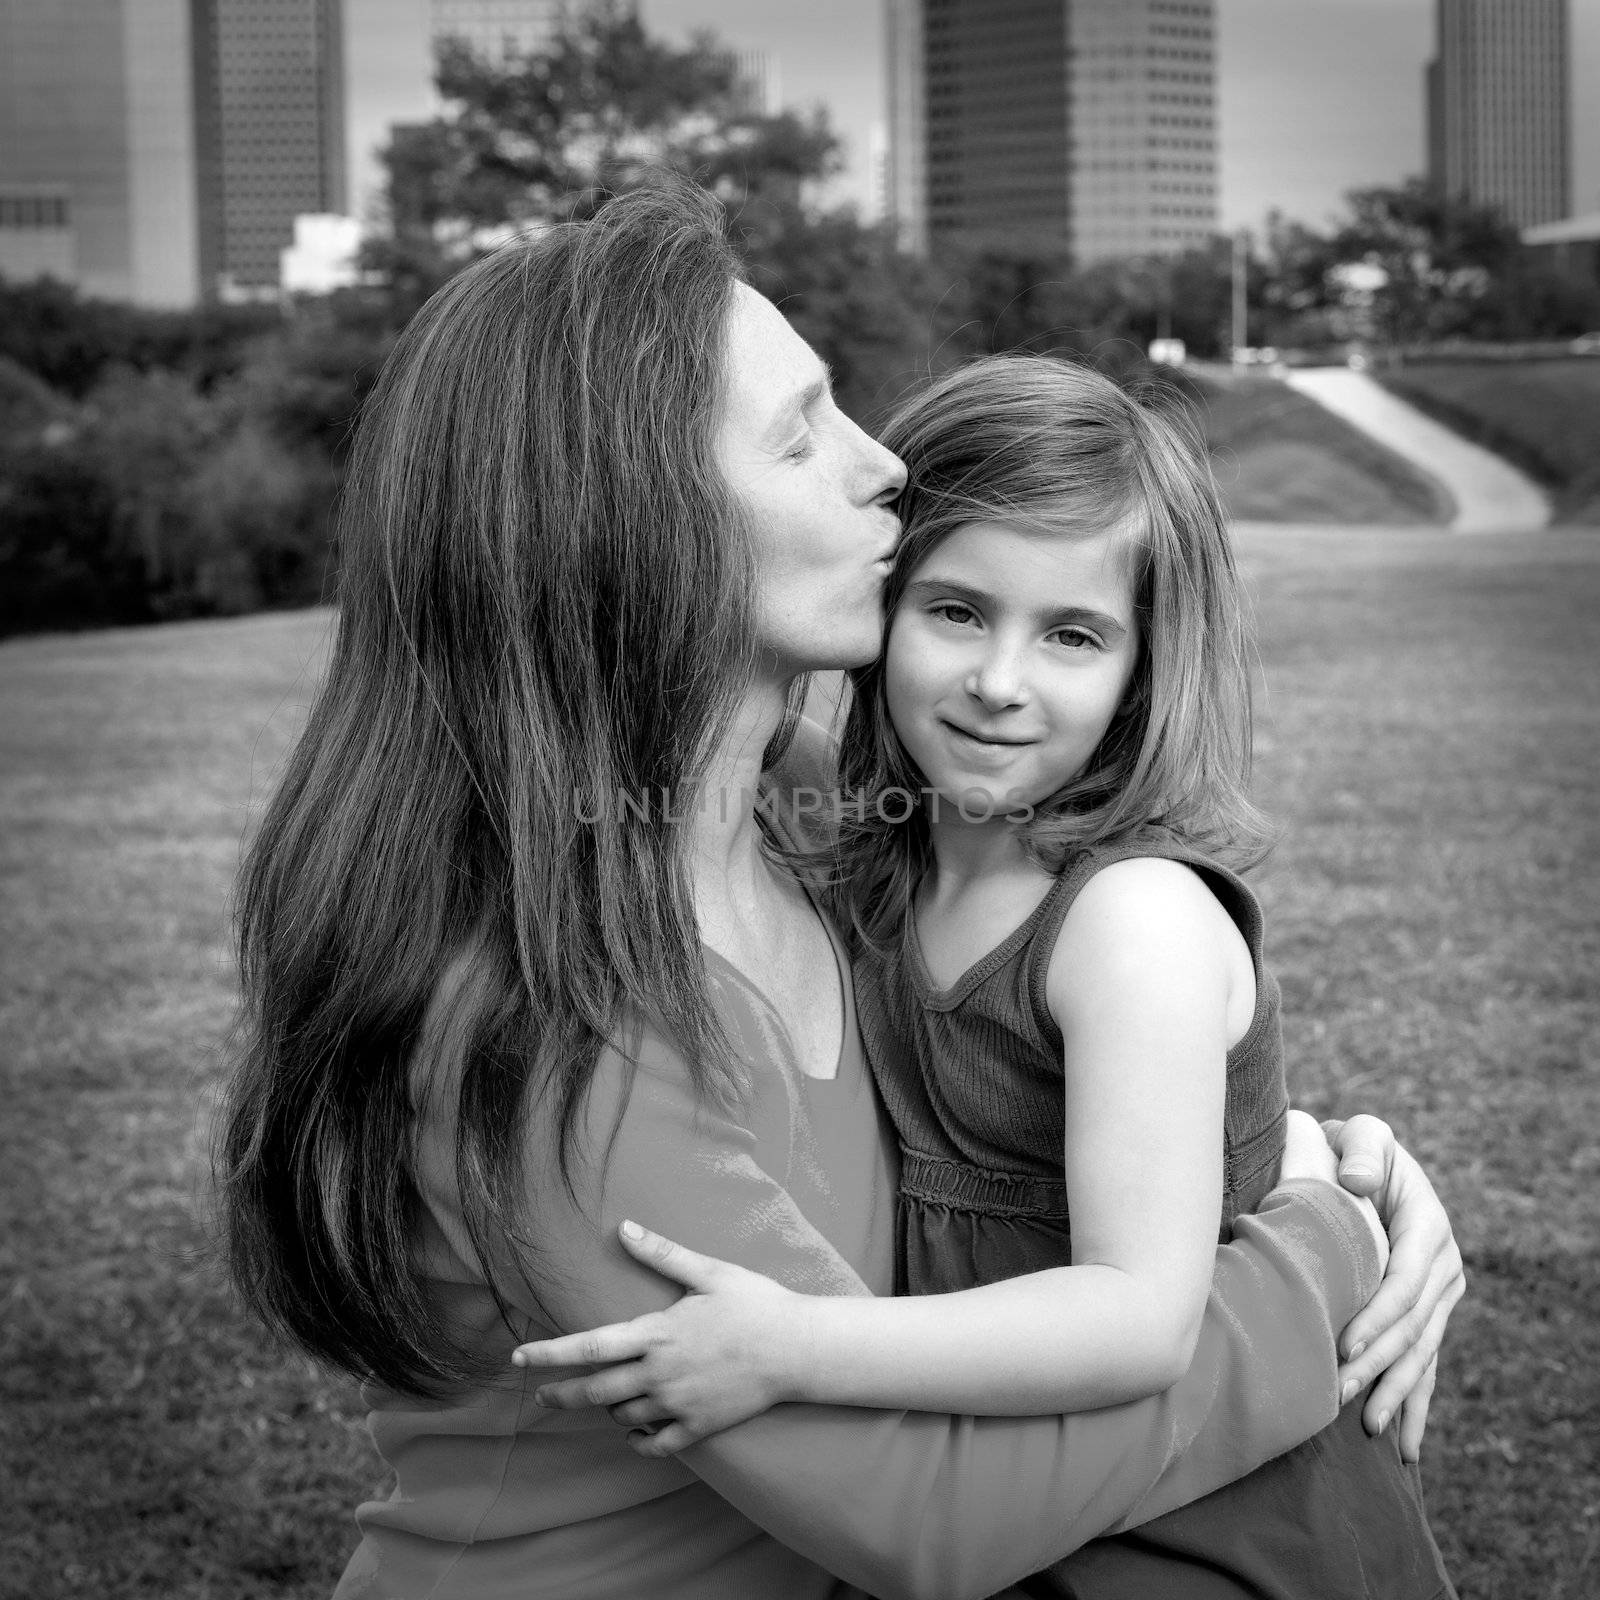 Mother and daughter happy hug kissing in park at city modern skyline background